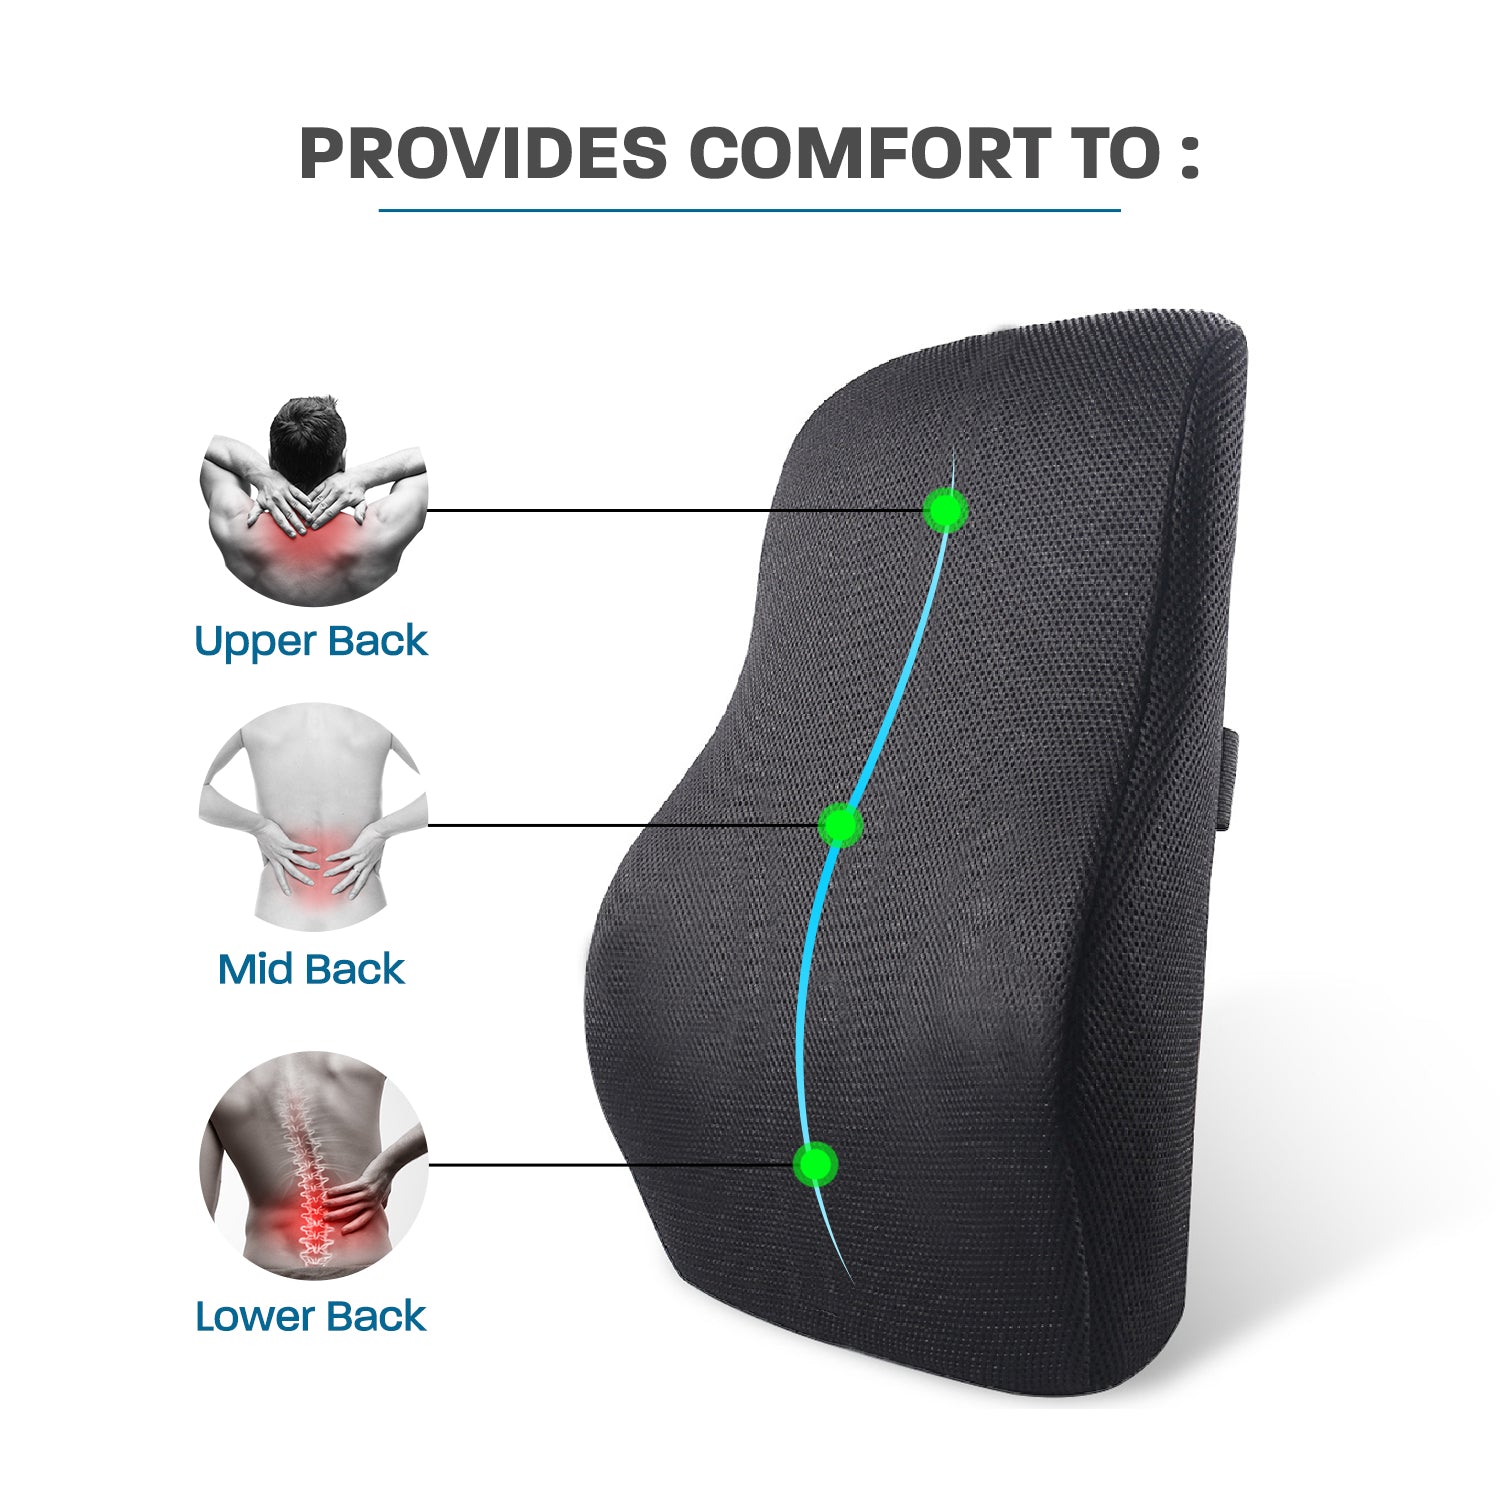 Lumbar Support Pillow for Office Chair - Lower Back Support